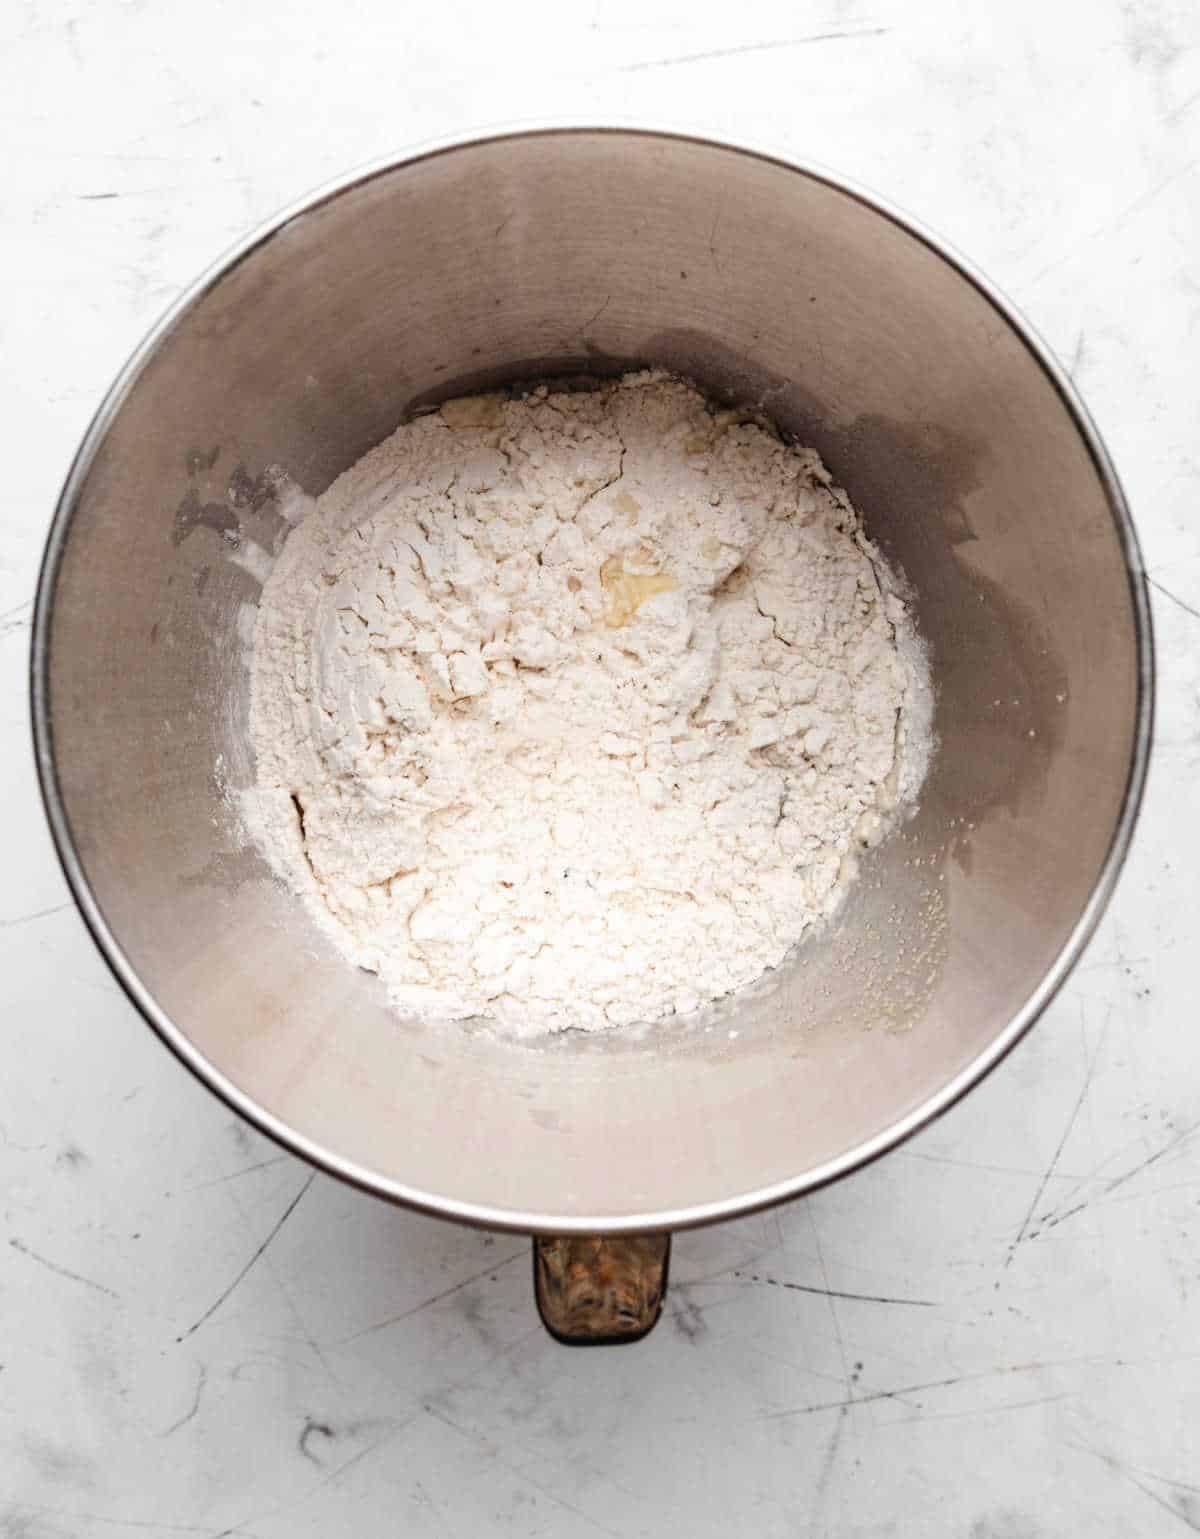 Flour mashed potatoes butter and sugar in a silver mixing bowl.